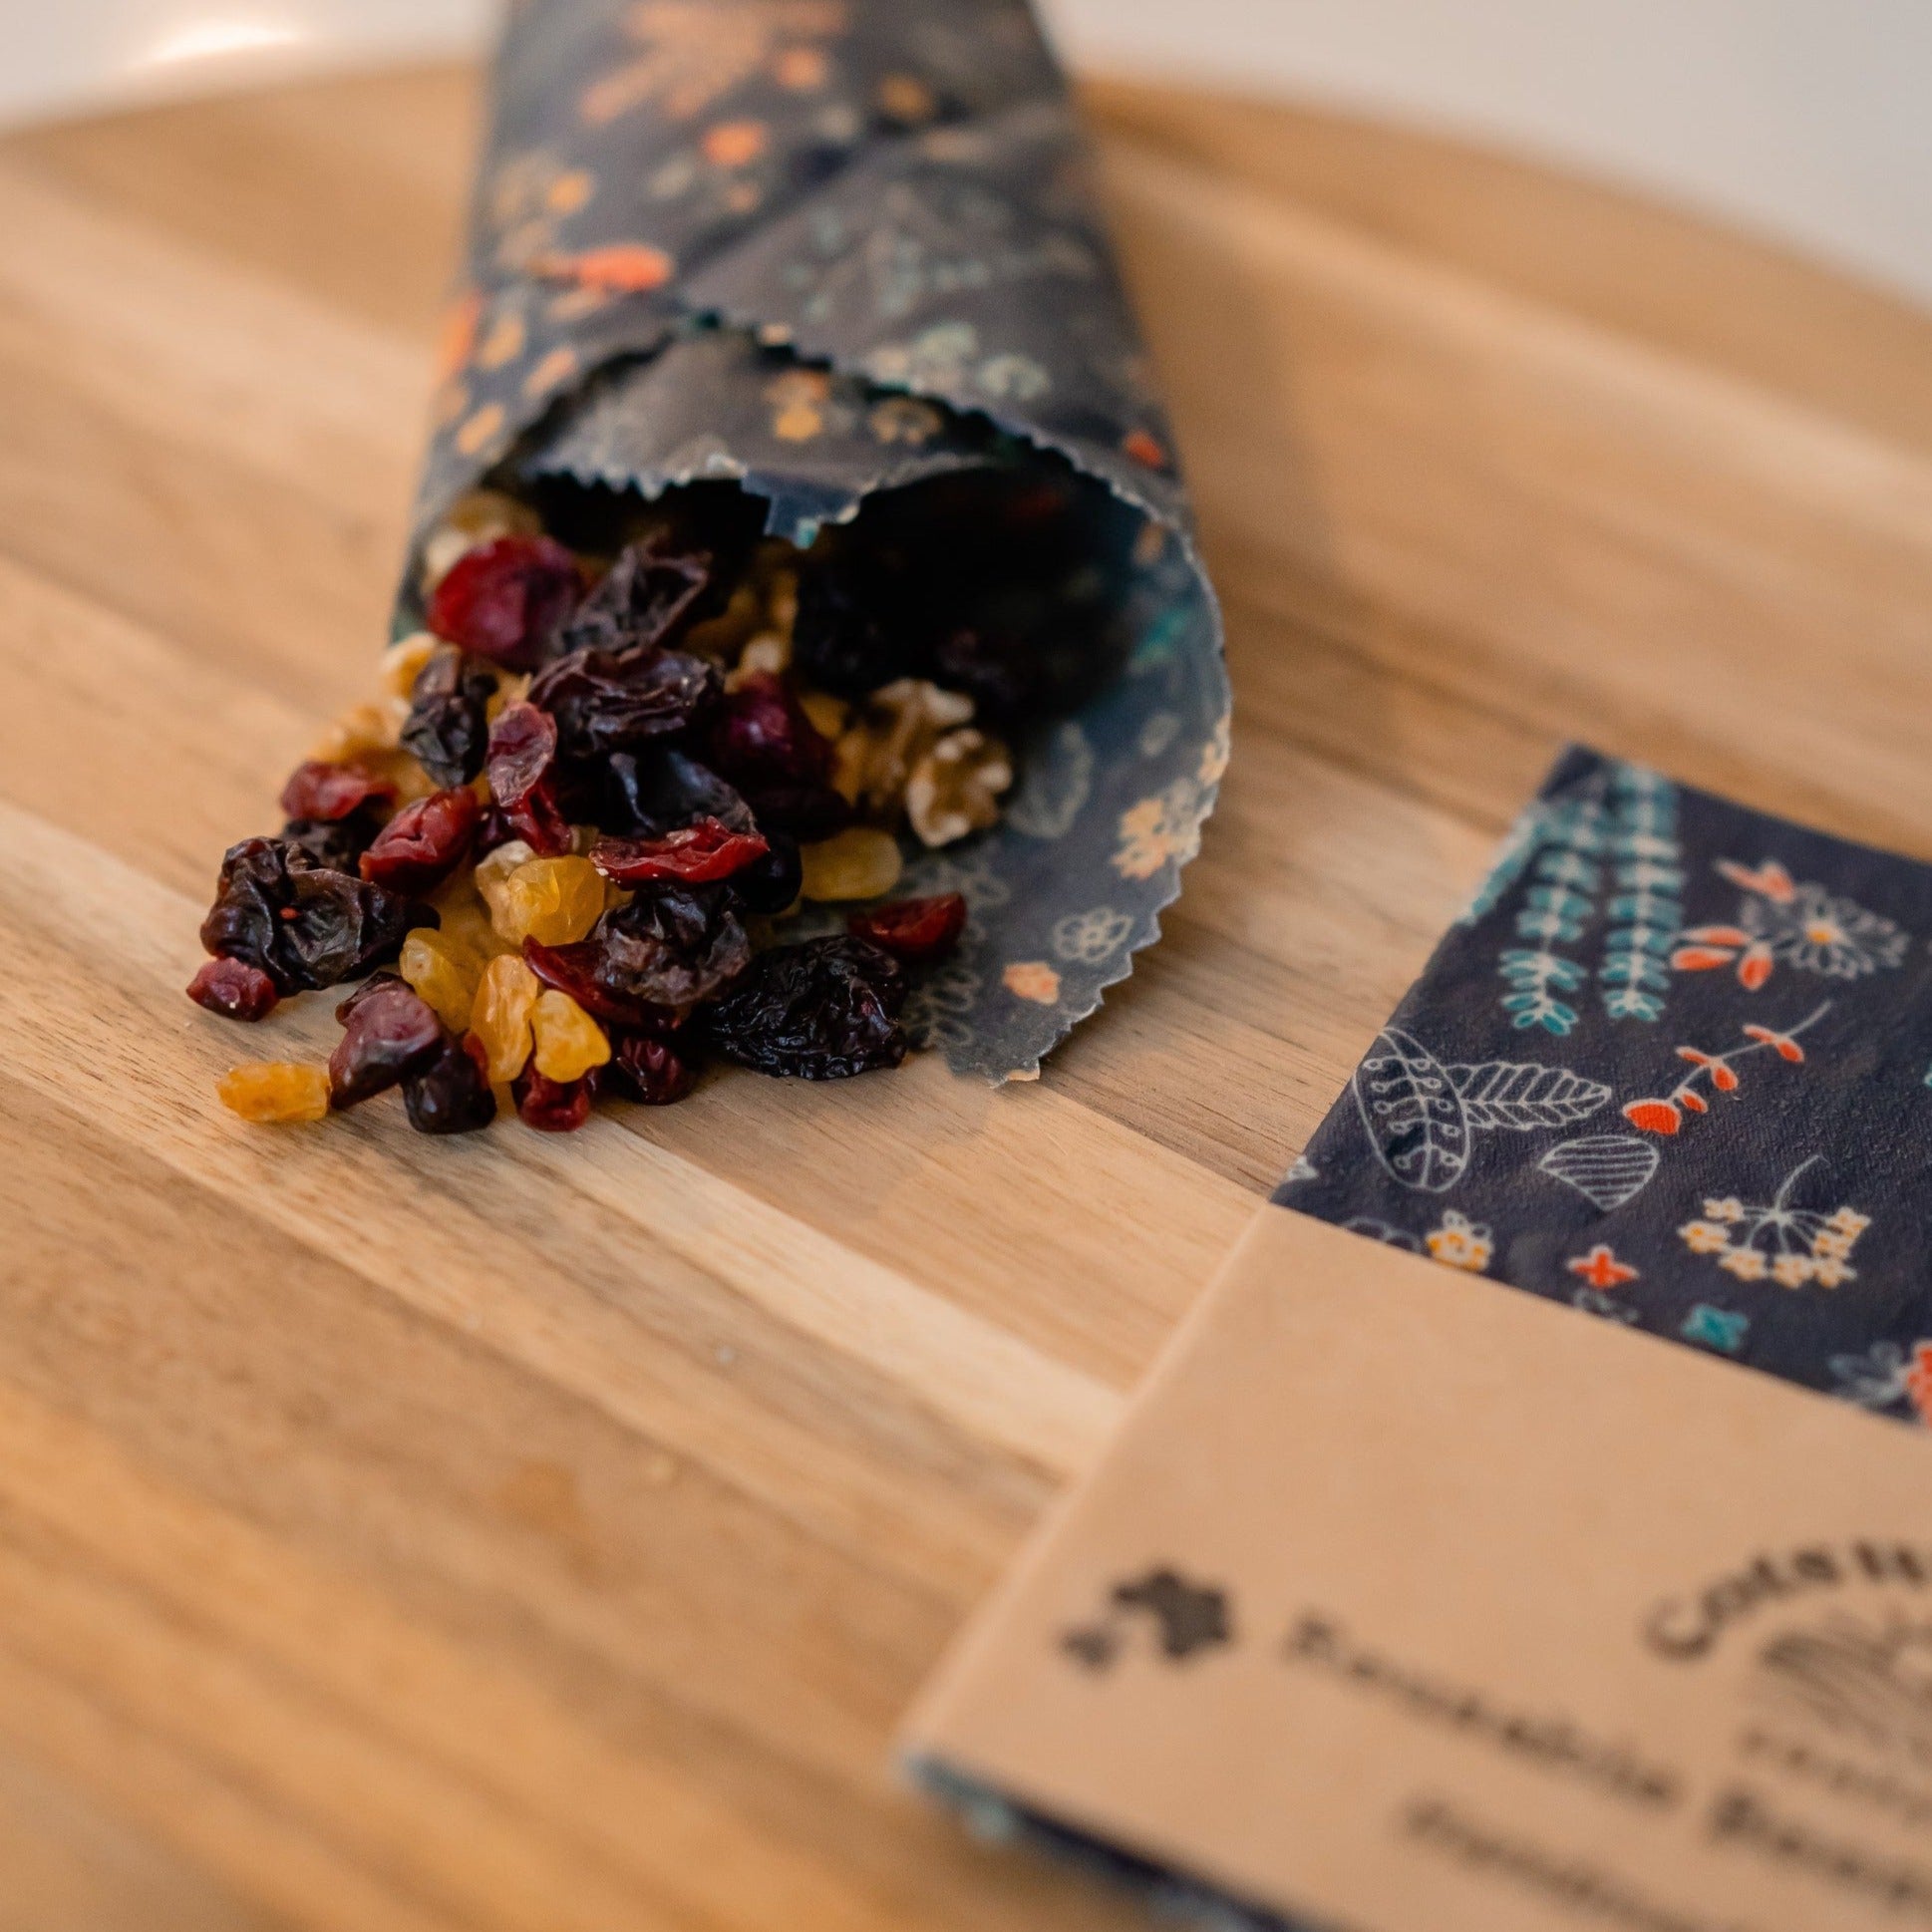 The Cotswold Eco Company Handmade Beeswax Wrap - Navy Blue Floral used as a snack wrap for dried fruit and nuts